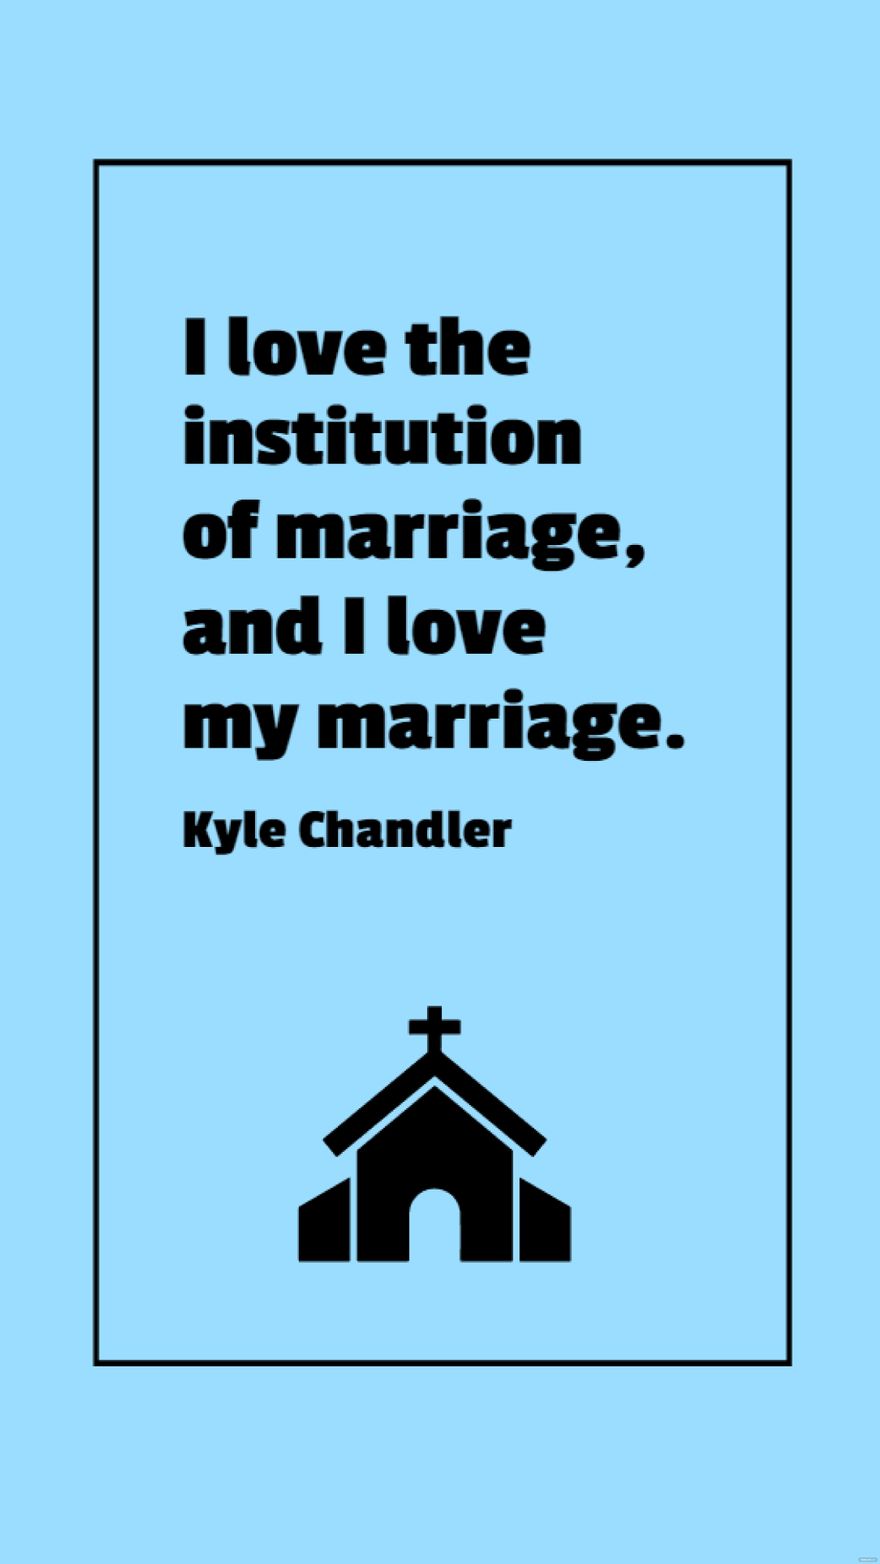 Kyle Chandler - I love the institution of marriage, and I love my marriage.